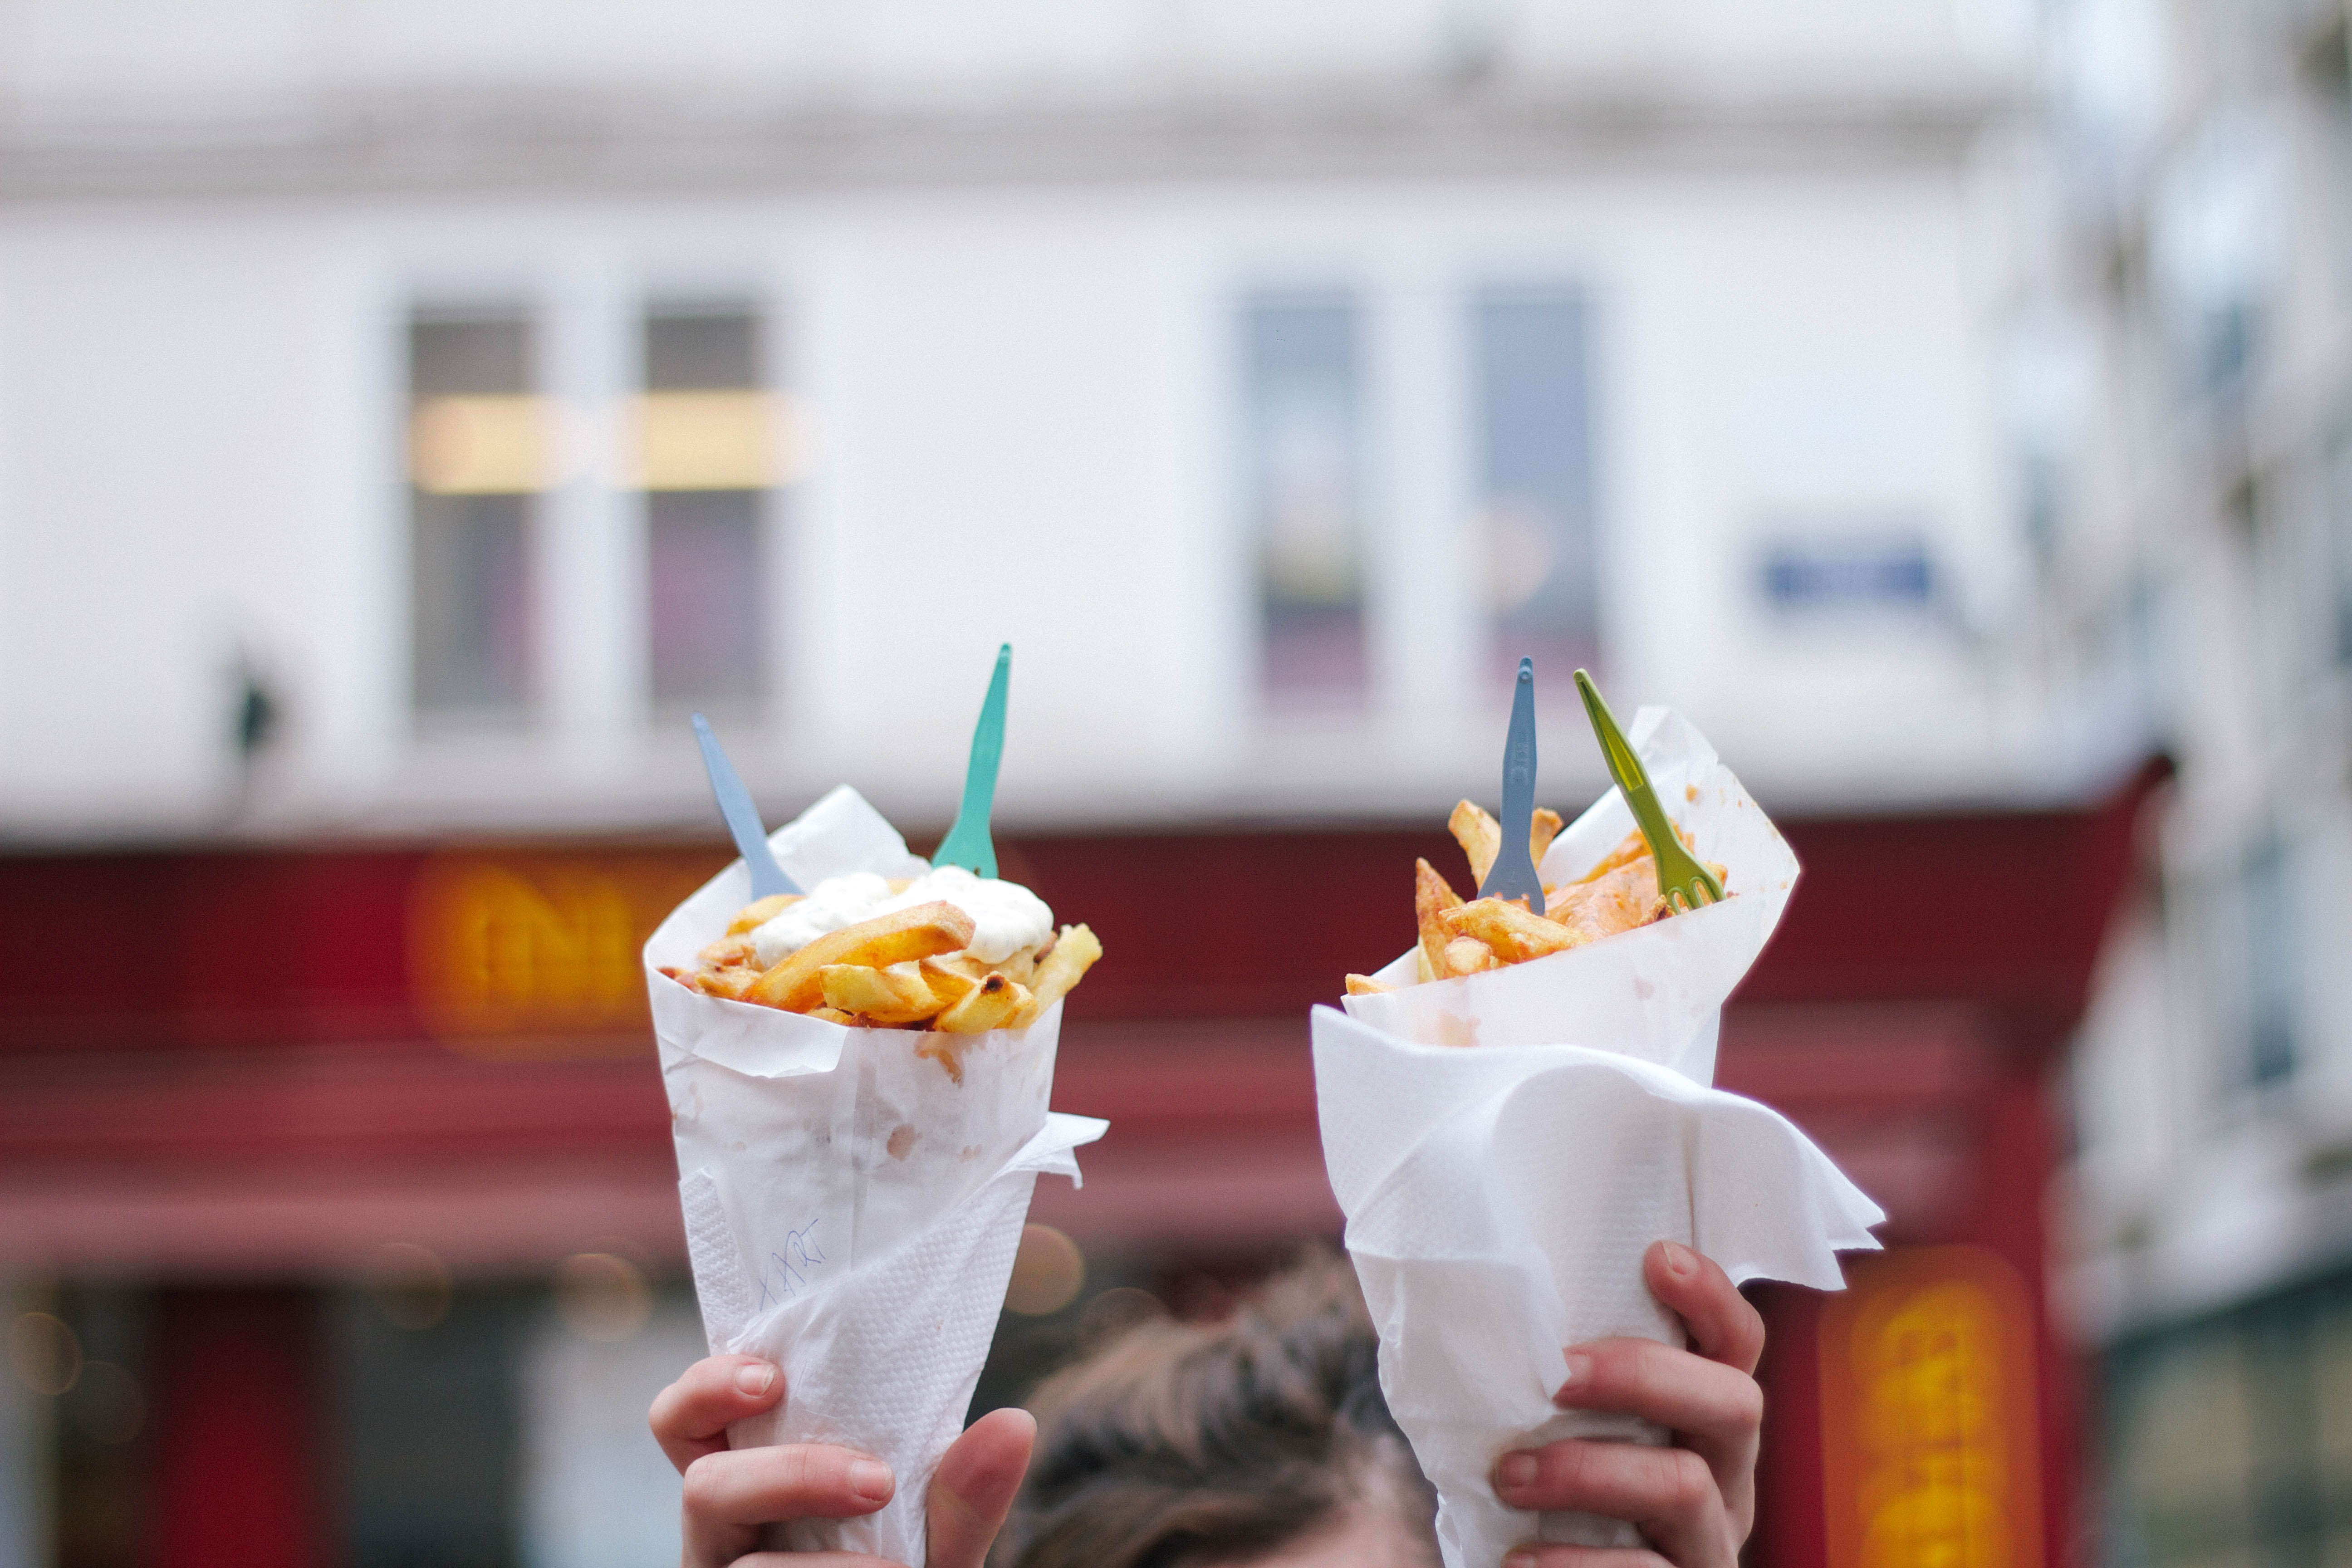 Things to do in London - Fish & Chips